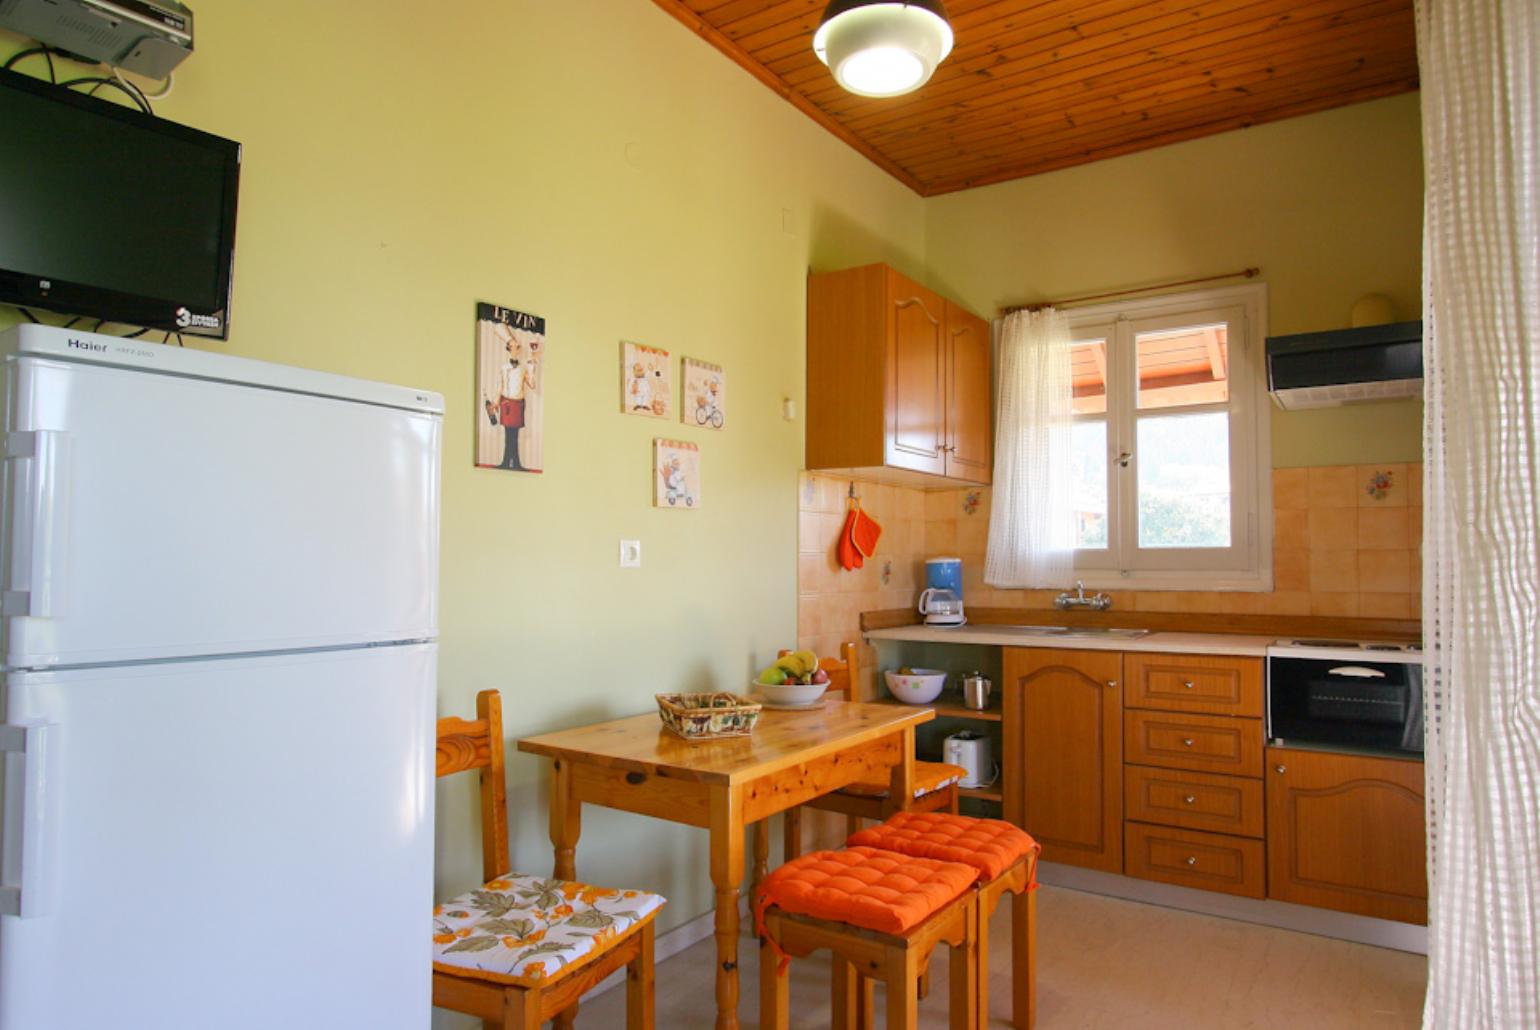 Equipped kitchen with dining area